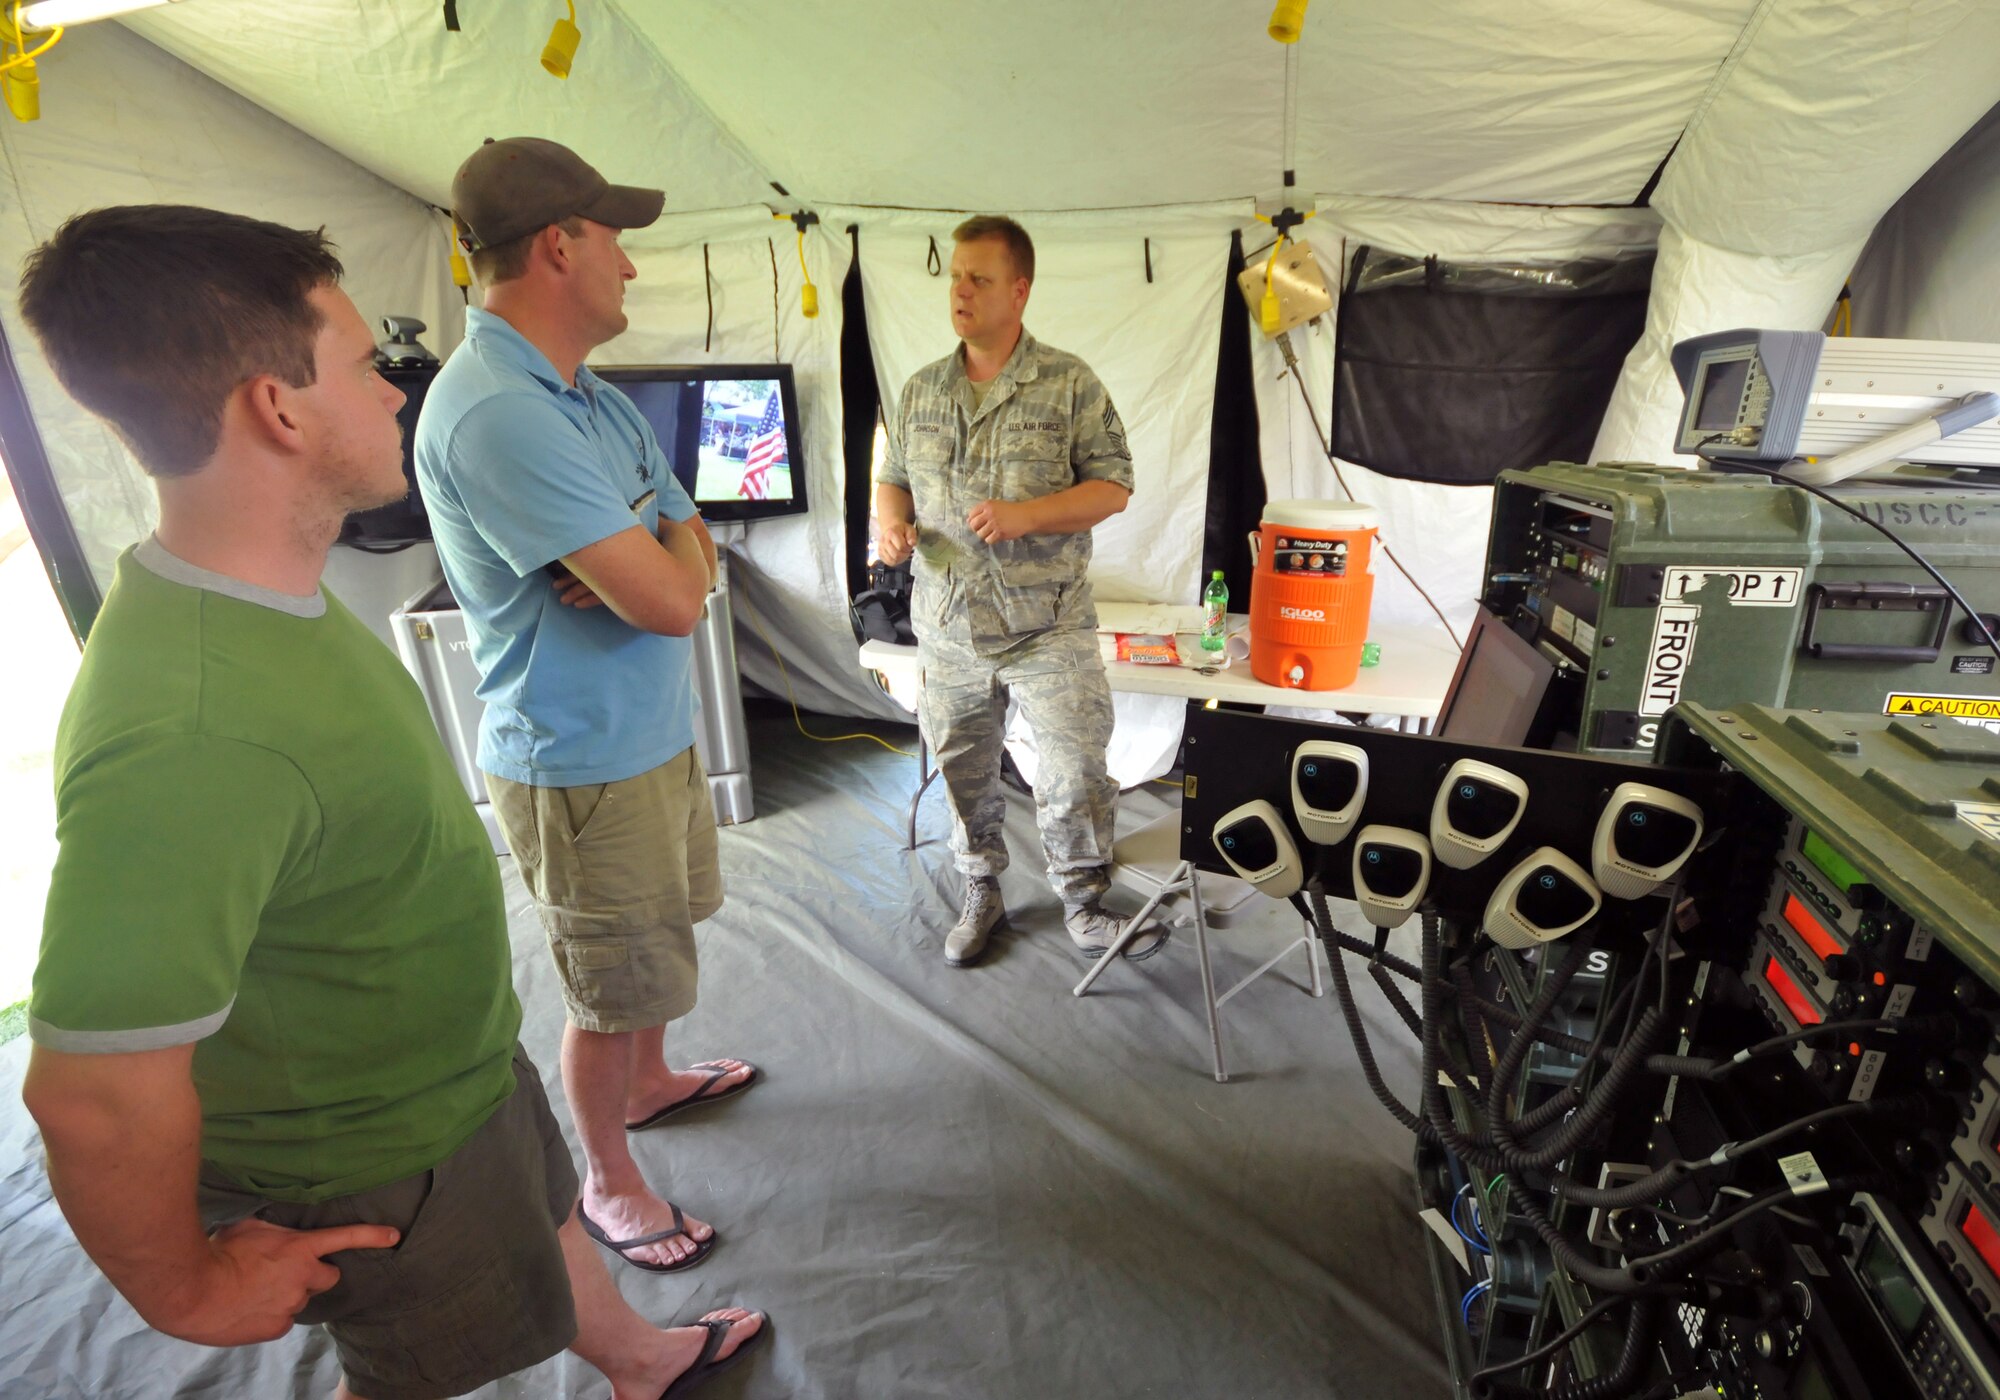 Chief Master Sgt.  Don Johnson of the 151st Communication Squadron, Utah Air National Guard, talks with Scott Stein of Murray (left) and Kelly Dansie of Salt Lake City, Utah about the Joint Incident Site Communication Center (JISCC) at Pioneer Park during Air Force Week June 1.  The JISCC allows the UTANG and Utah Army NG to provide communications with multiple government and civilian agencies during times of disasters by linking multiple radio frequencies and phone lines at the same time.   Pioneer Park in Salt Lake City was one of the locations for the public to meet and learn about the Air Force capabilities during AF Week June 1 ? 7, 2009.  U.S. Air Force photo by Tech. Sgt. Michael D Evans.
